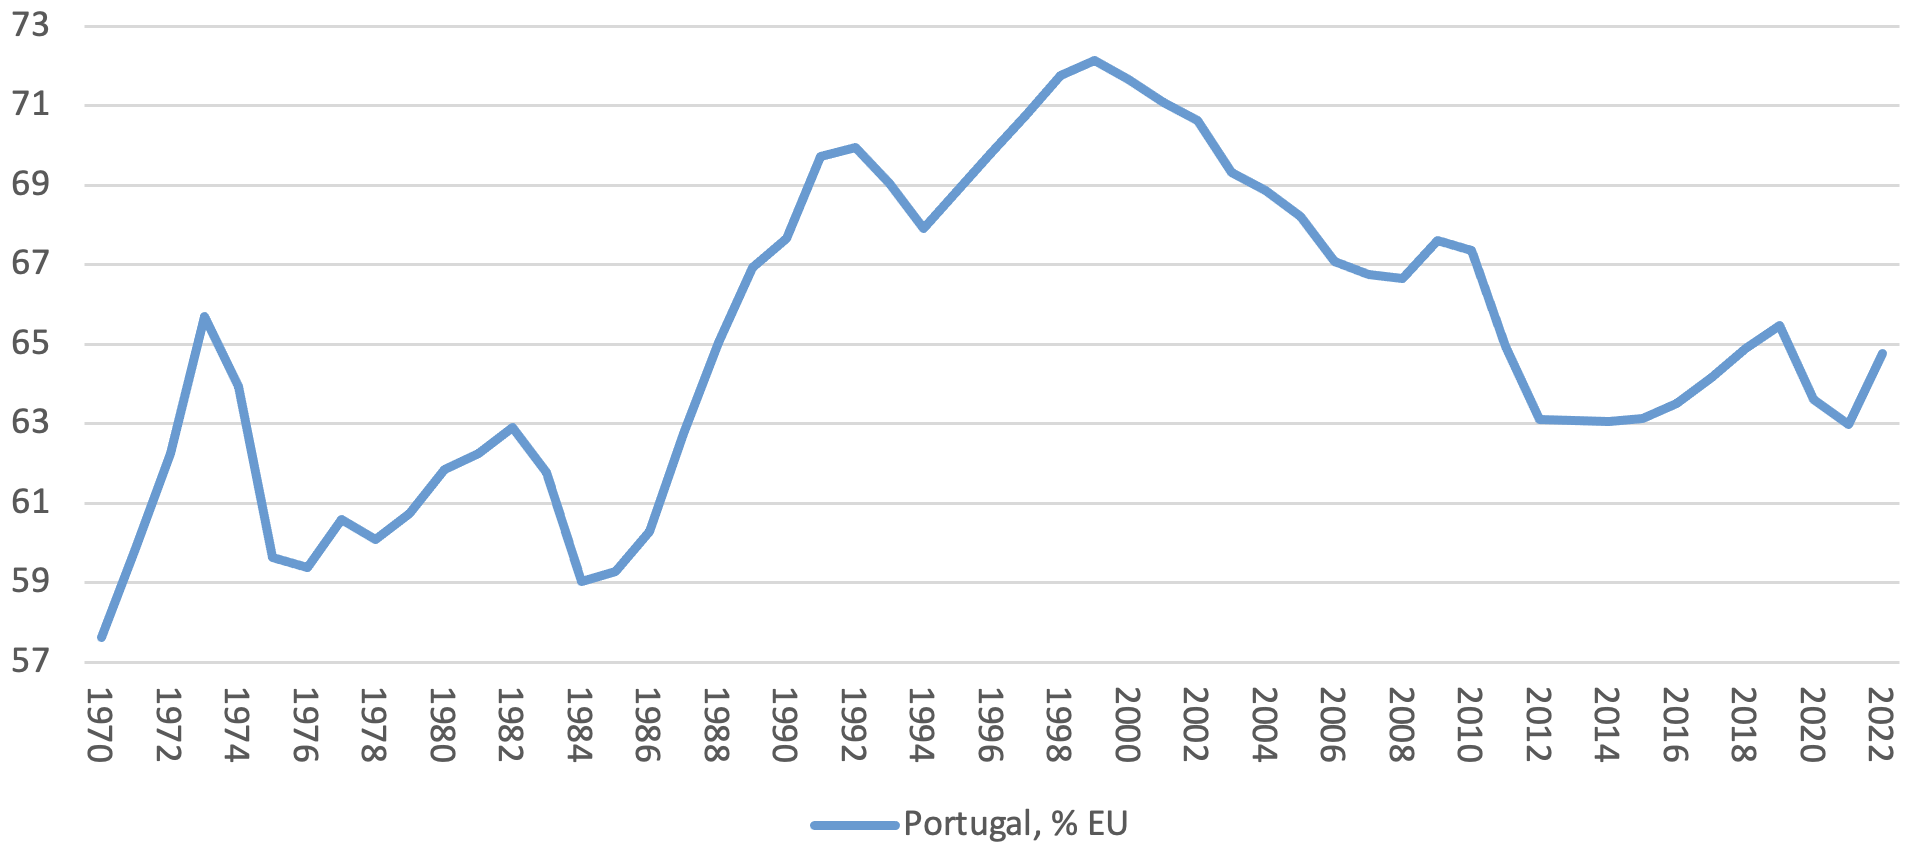 Figure 2 GDP per capita in Portugal, as a percentage of the equivalent value of the EU